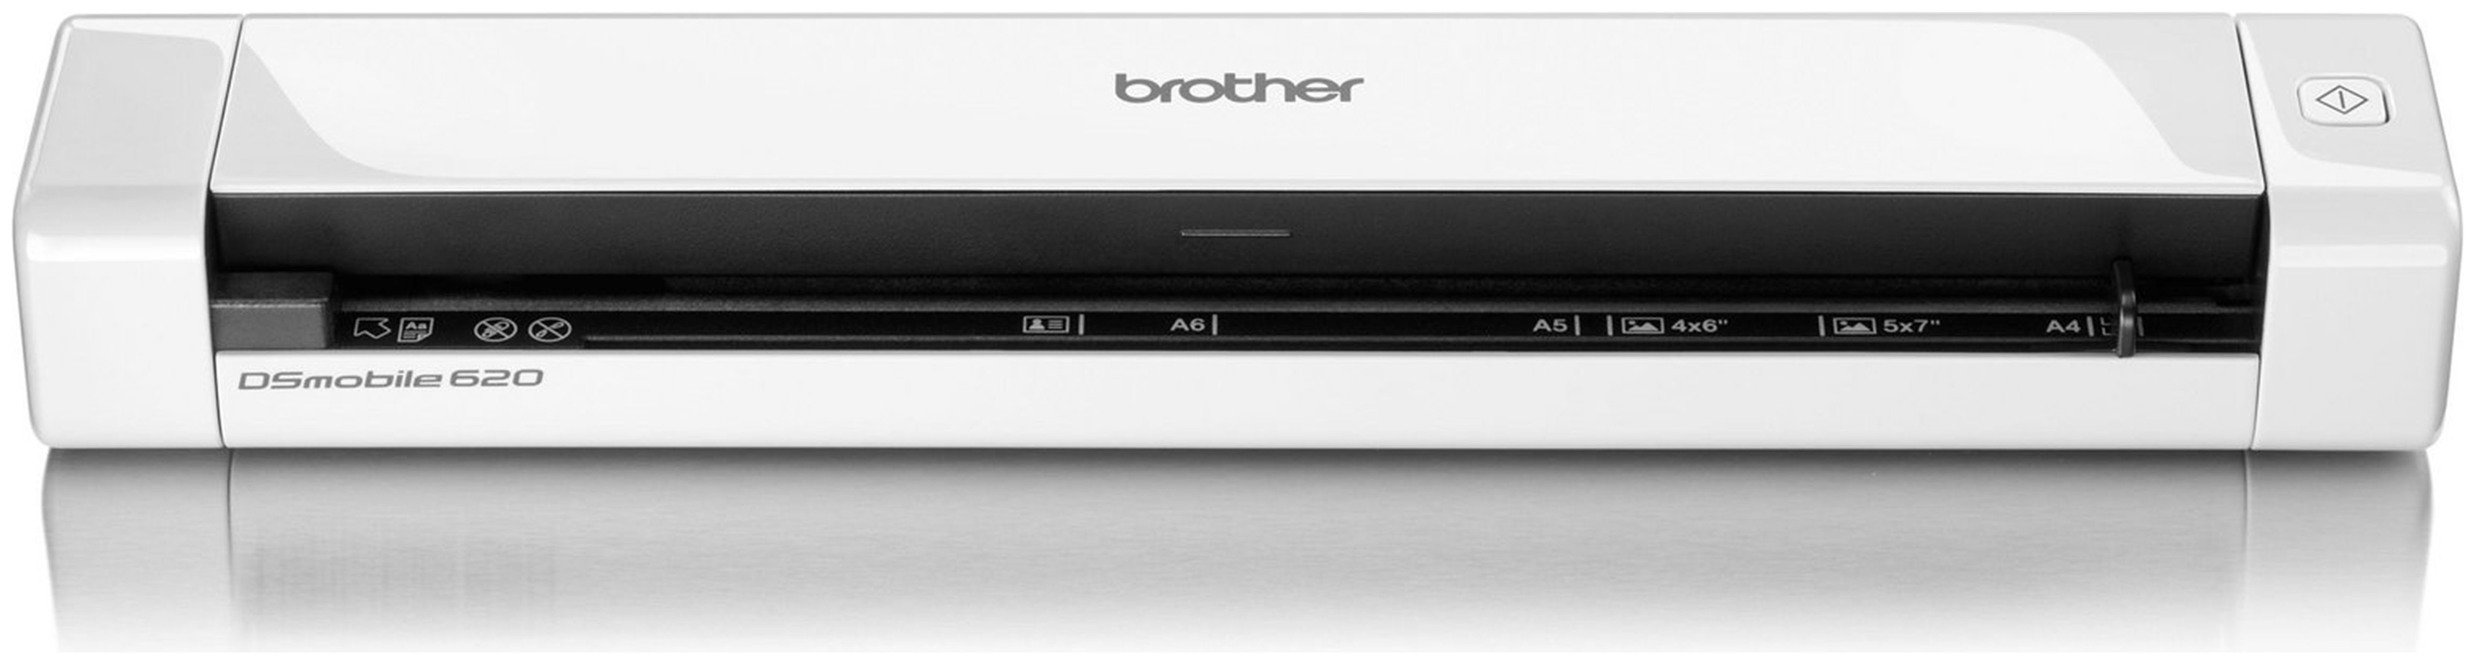 Brother DS620 Mobile Document Scanner